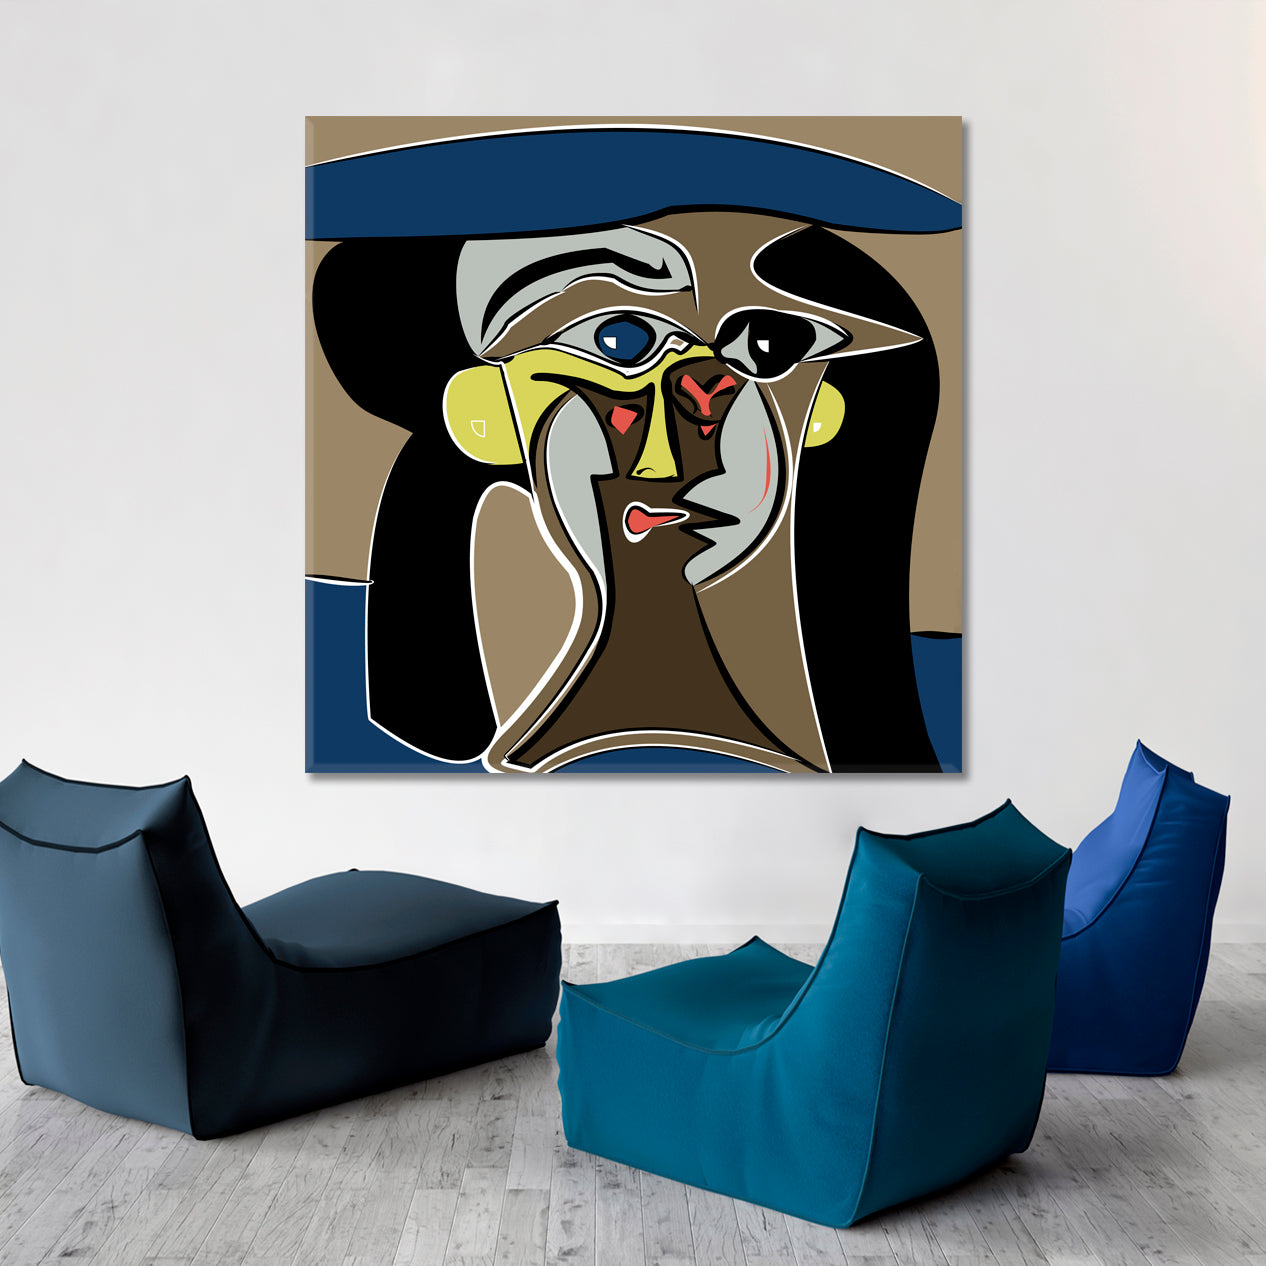 PICASSO MOTIVES Cubism Art Style Modern Abstraction Contemporary Art Artesty 1 Panel 46"x46" 